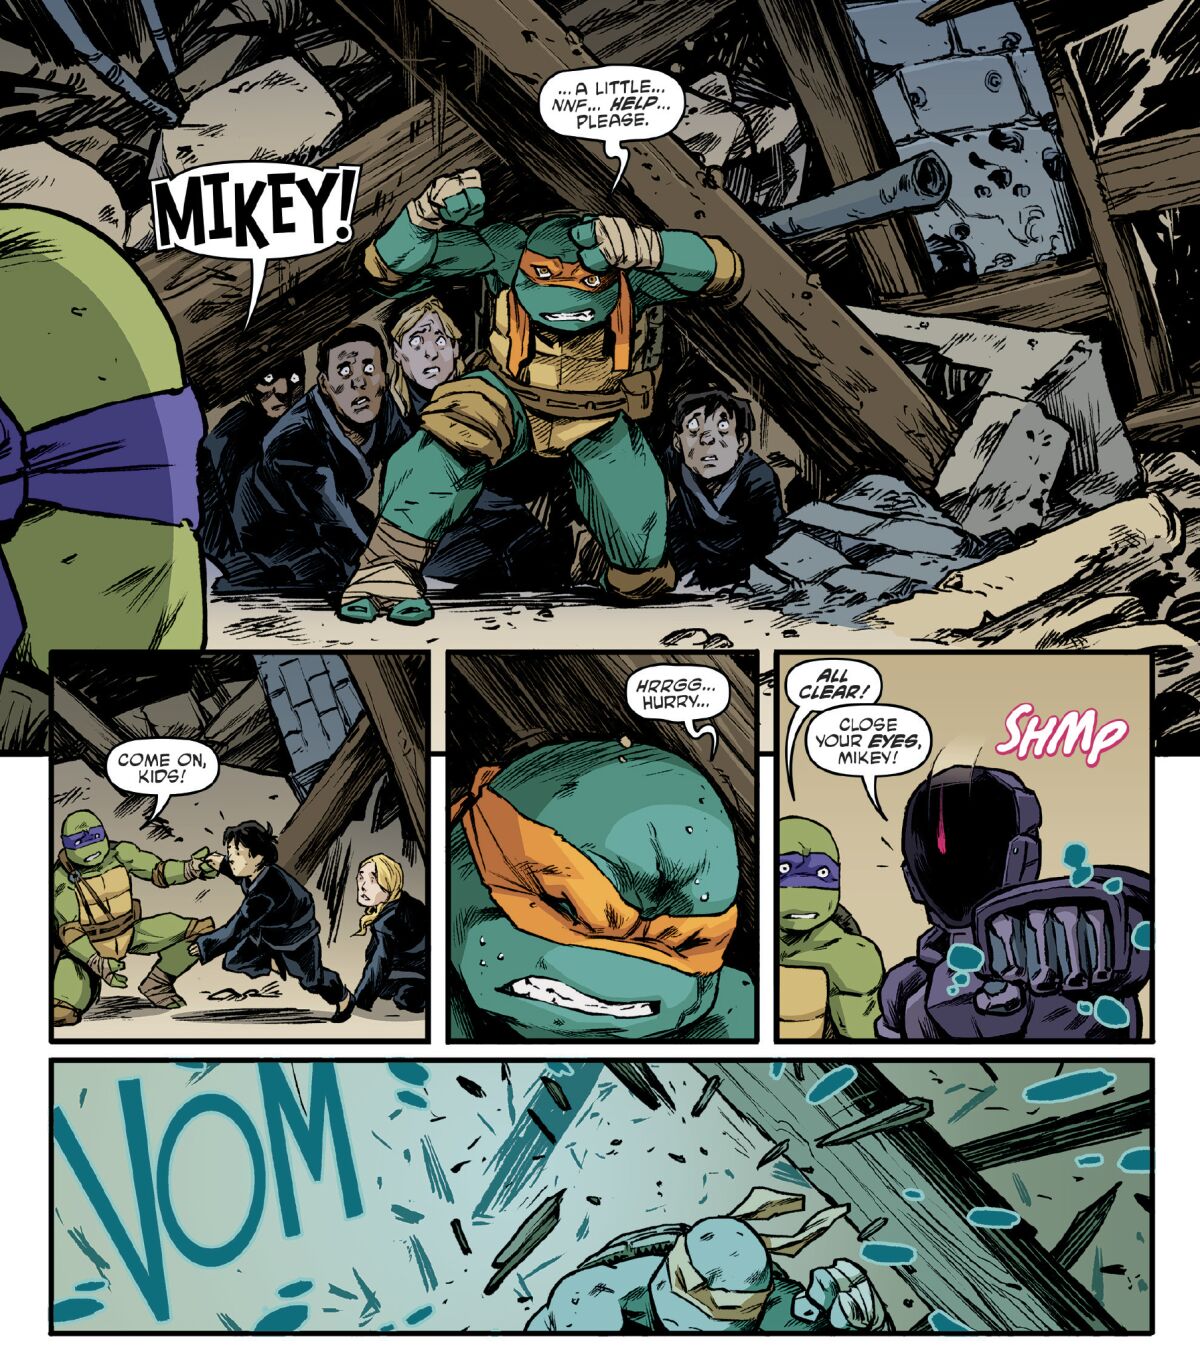 A panel from the 100th edition of IDW Publishing's "Teenage Mutant Ninja Turtles" series, released on Dec. 11, 2019.